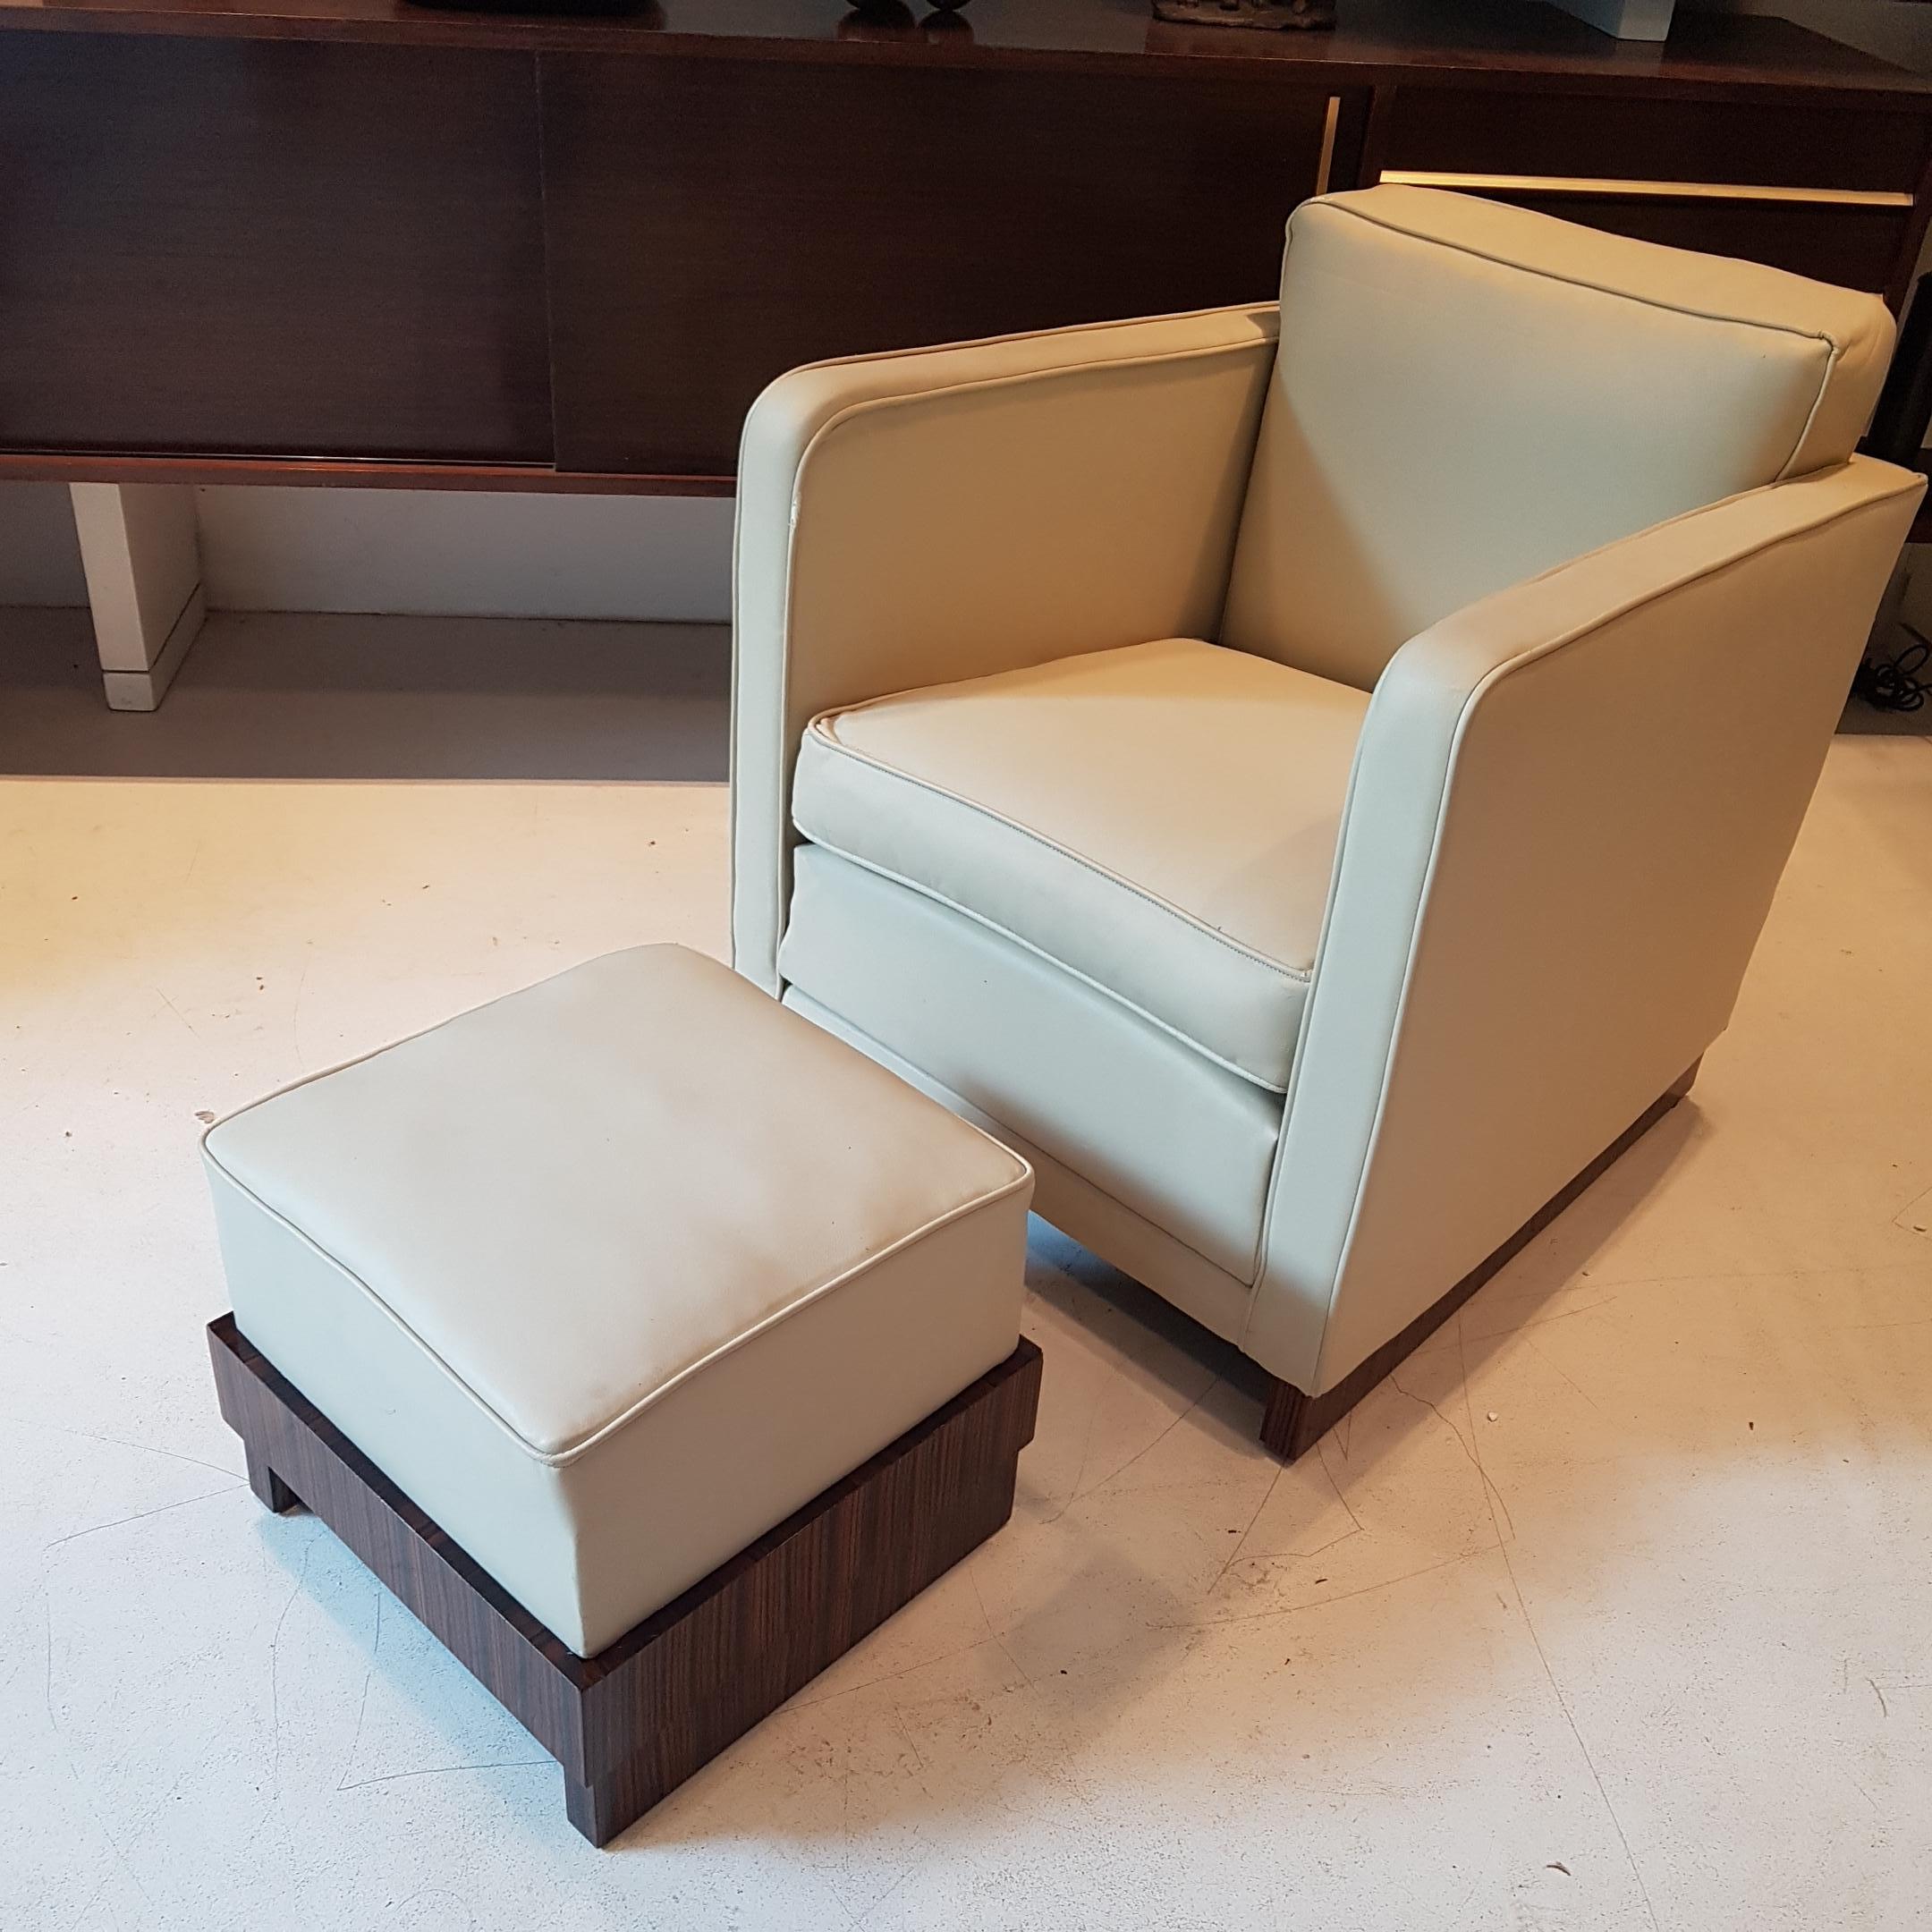 Well sized, comfortable Art Deco club chair in a classic Art Deco square shape with matching footstool. This comfortable armchair has a beautiful macassar ebony base as has the matching footstool.  Rather than having legs the chairs have a